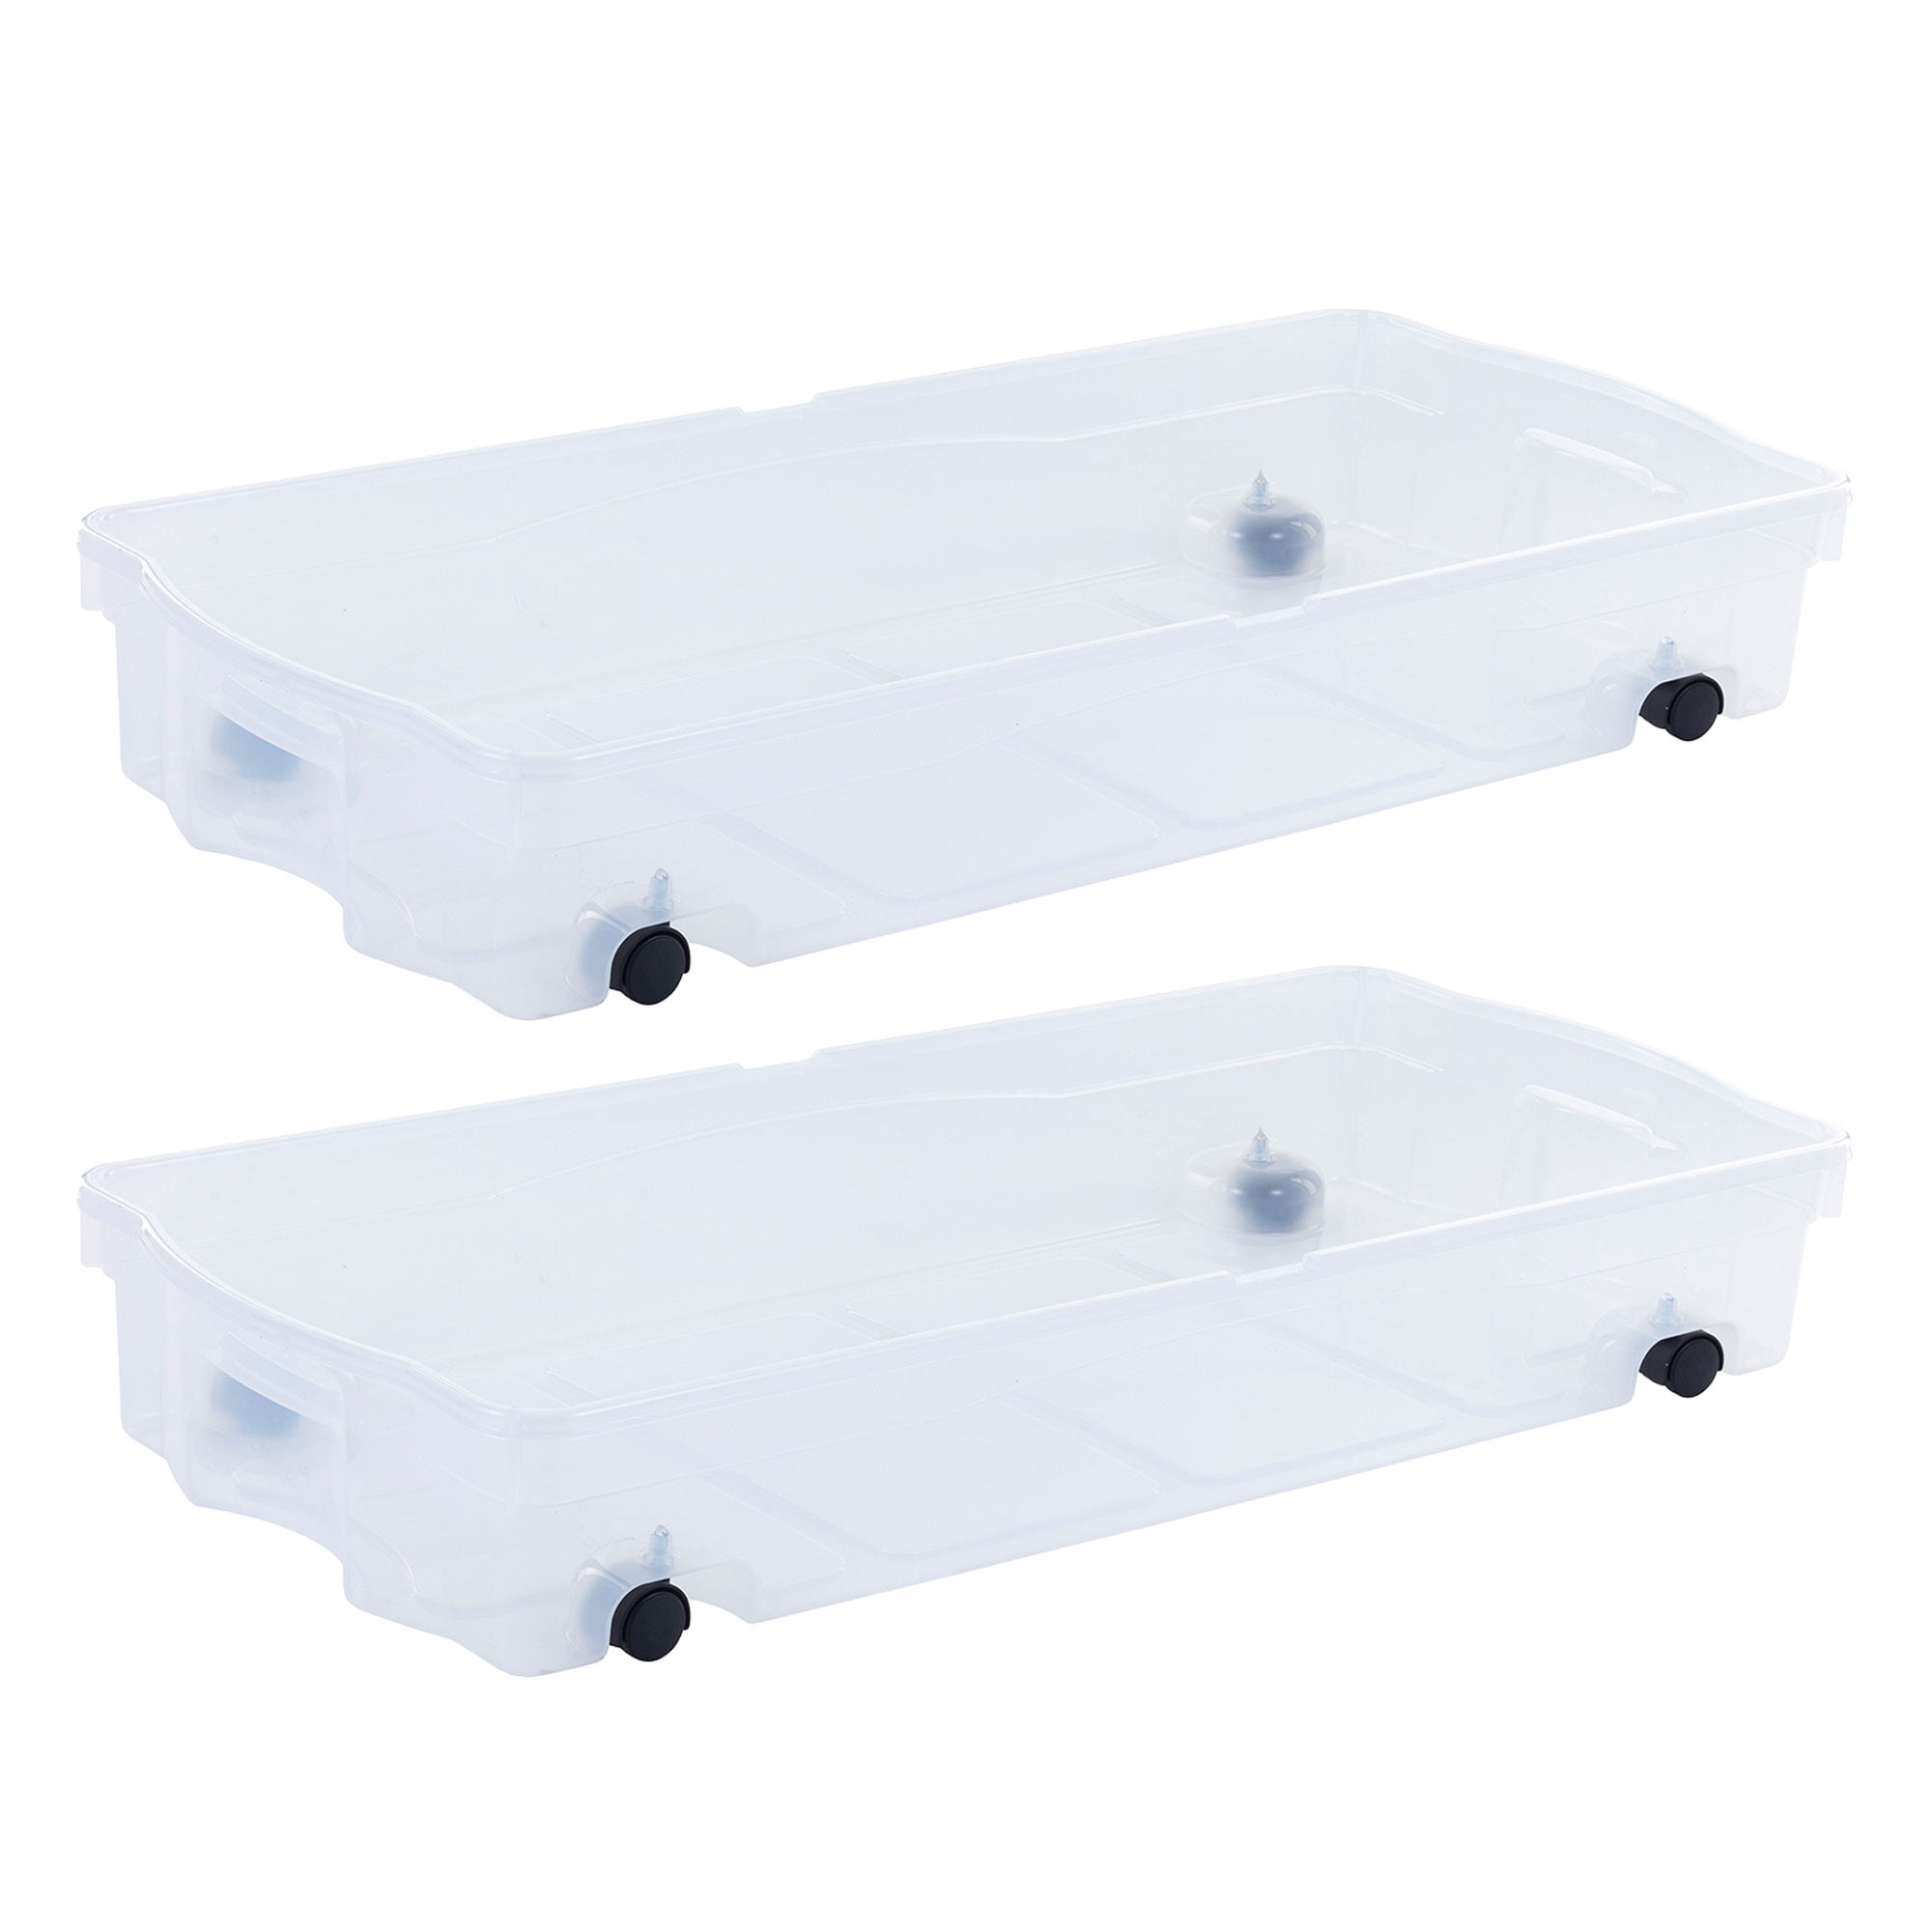 SALE!🌟Rubbermaid Wrap N'Craft Underbed Storage Container Includes 2 Trays